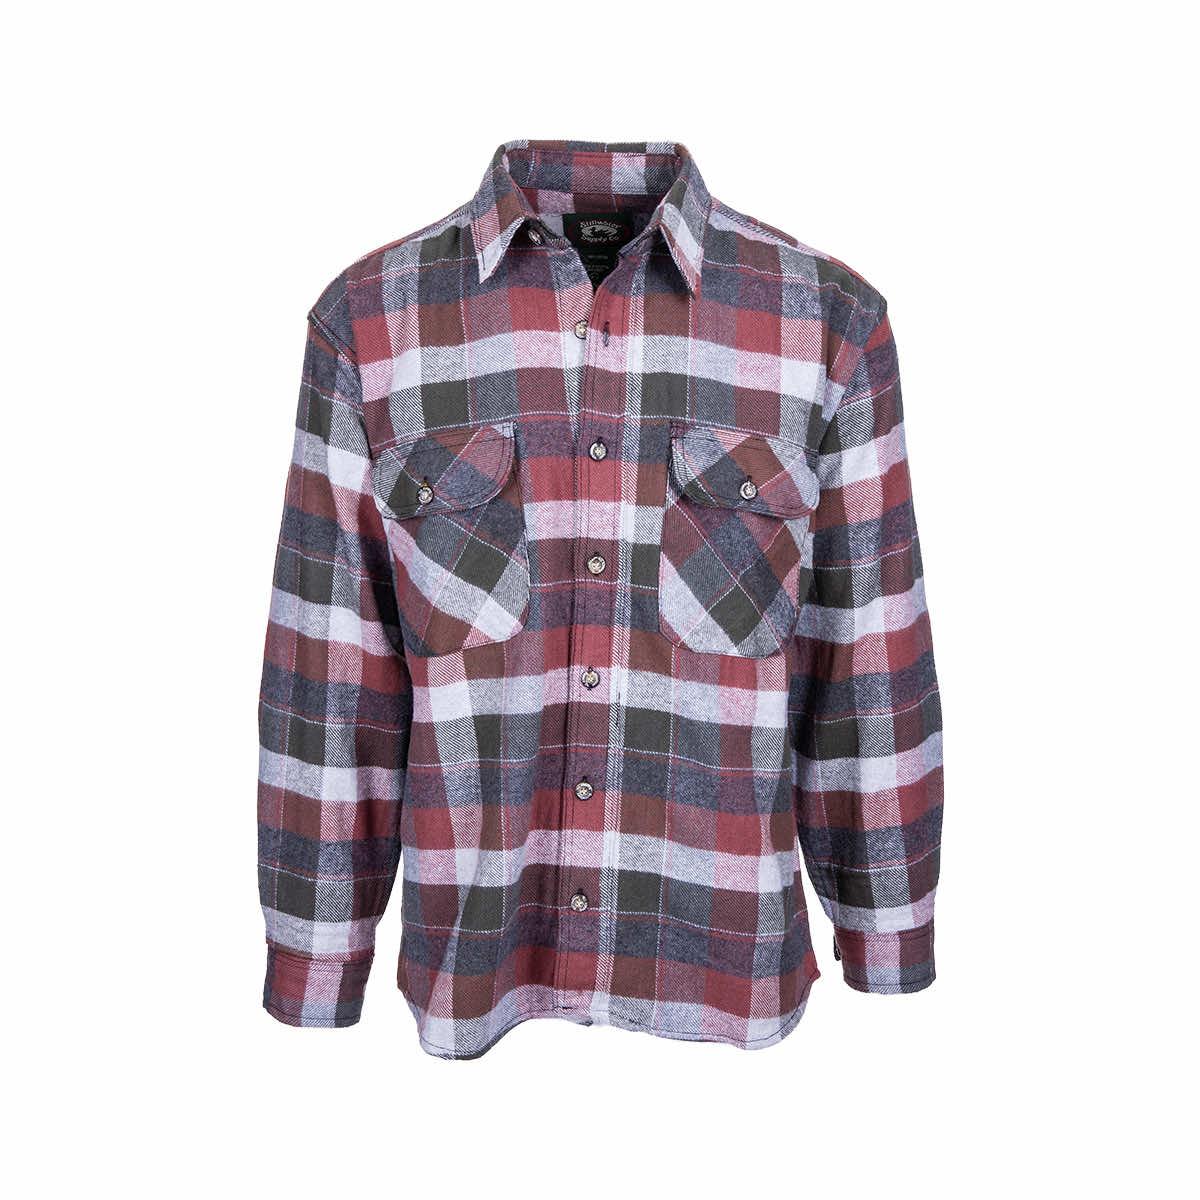 Flannel Shirt Outfits For Men (489 ideas & outfits)